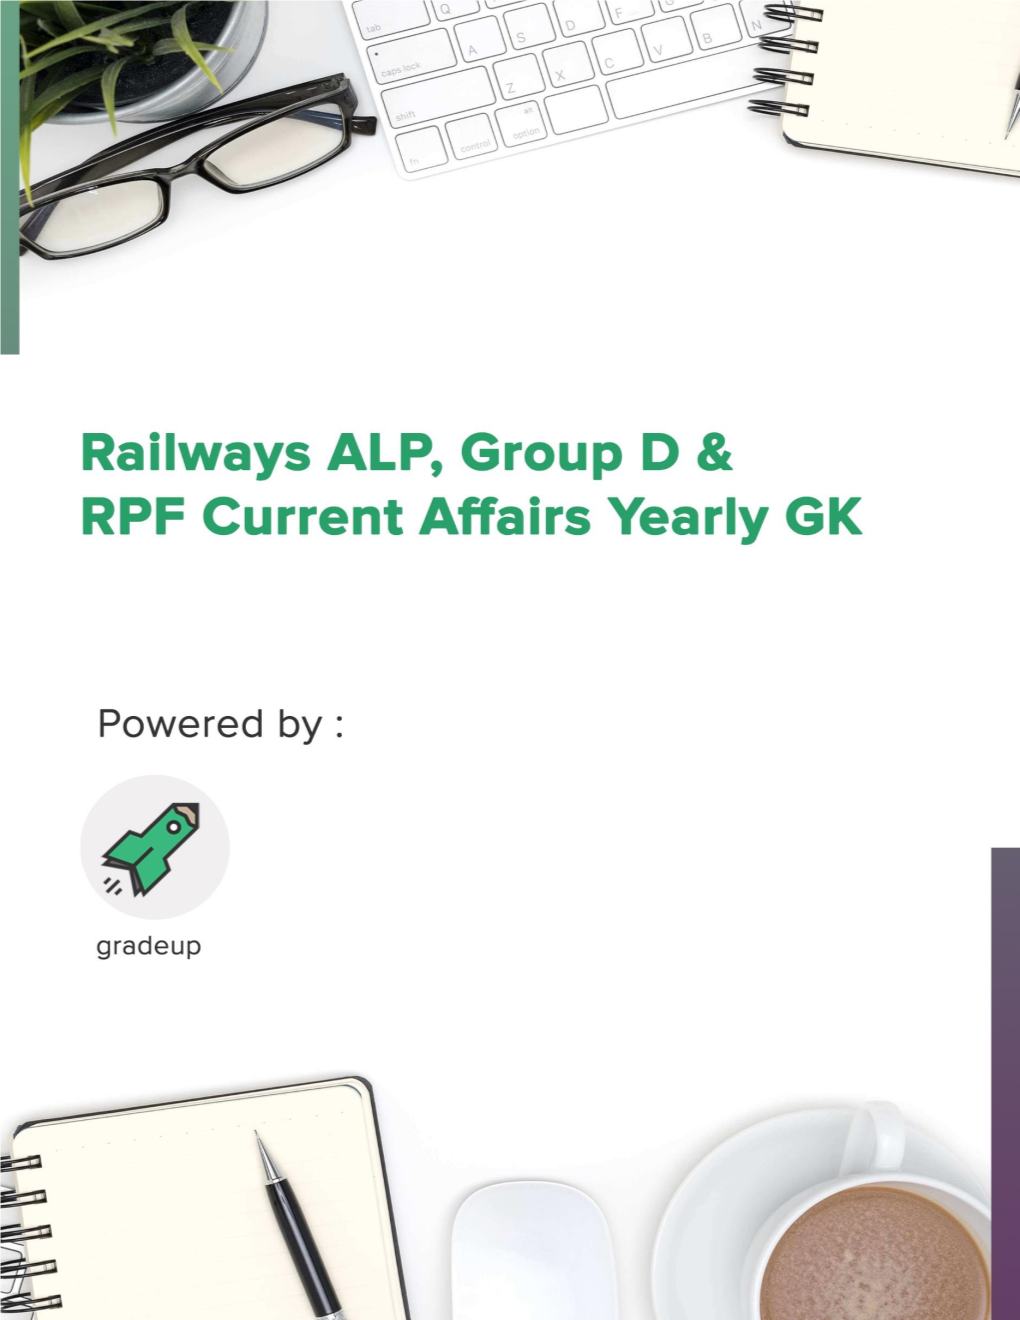 Current Affairs Year Book 2018 PDF for Railways ALP, Group D & RPF Exam 2018 January to September